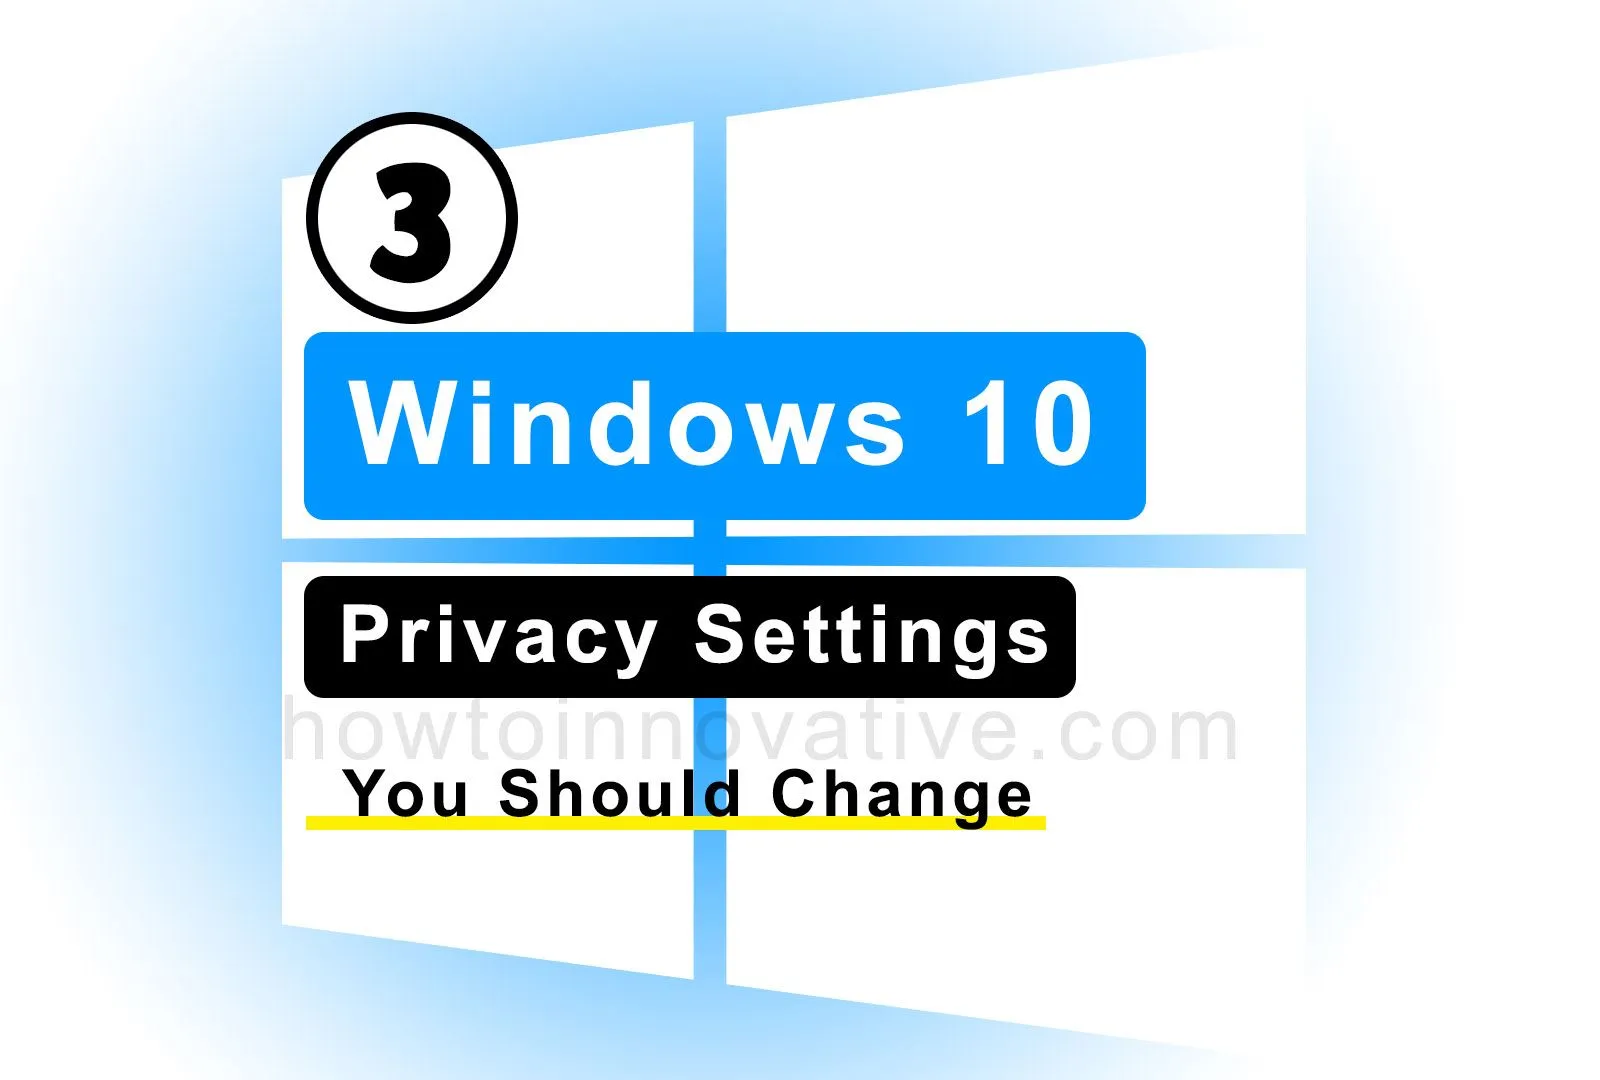 3 Windows 10 Privacy Settings You Should Change - Protect Your Personal Data, Browse Data, Activity